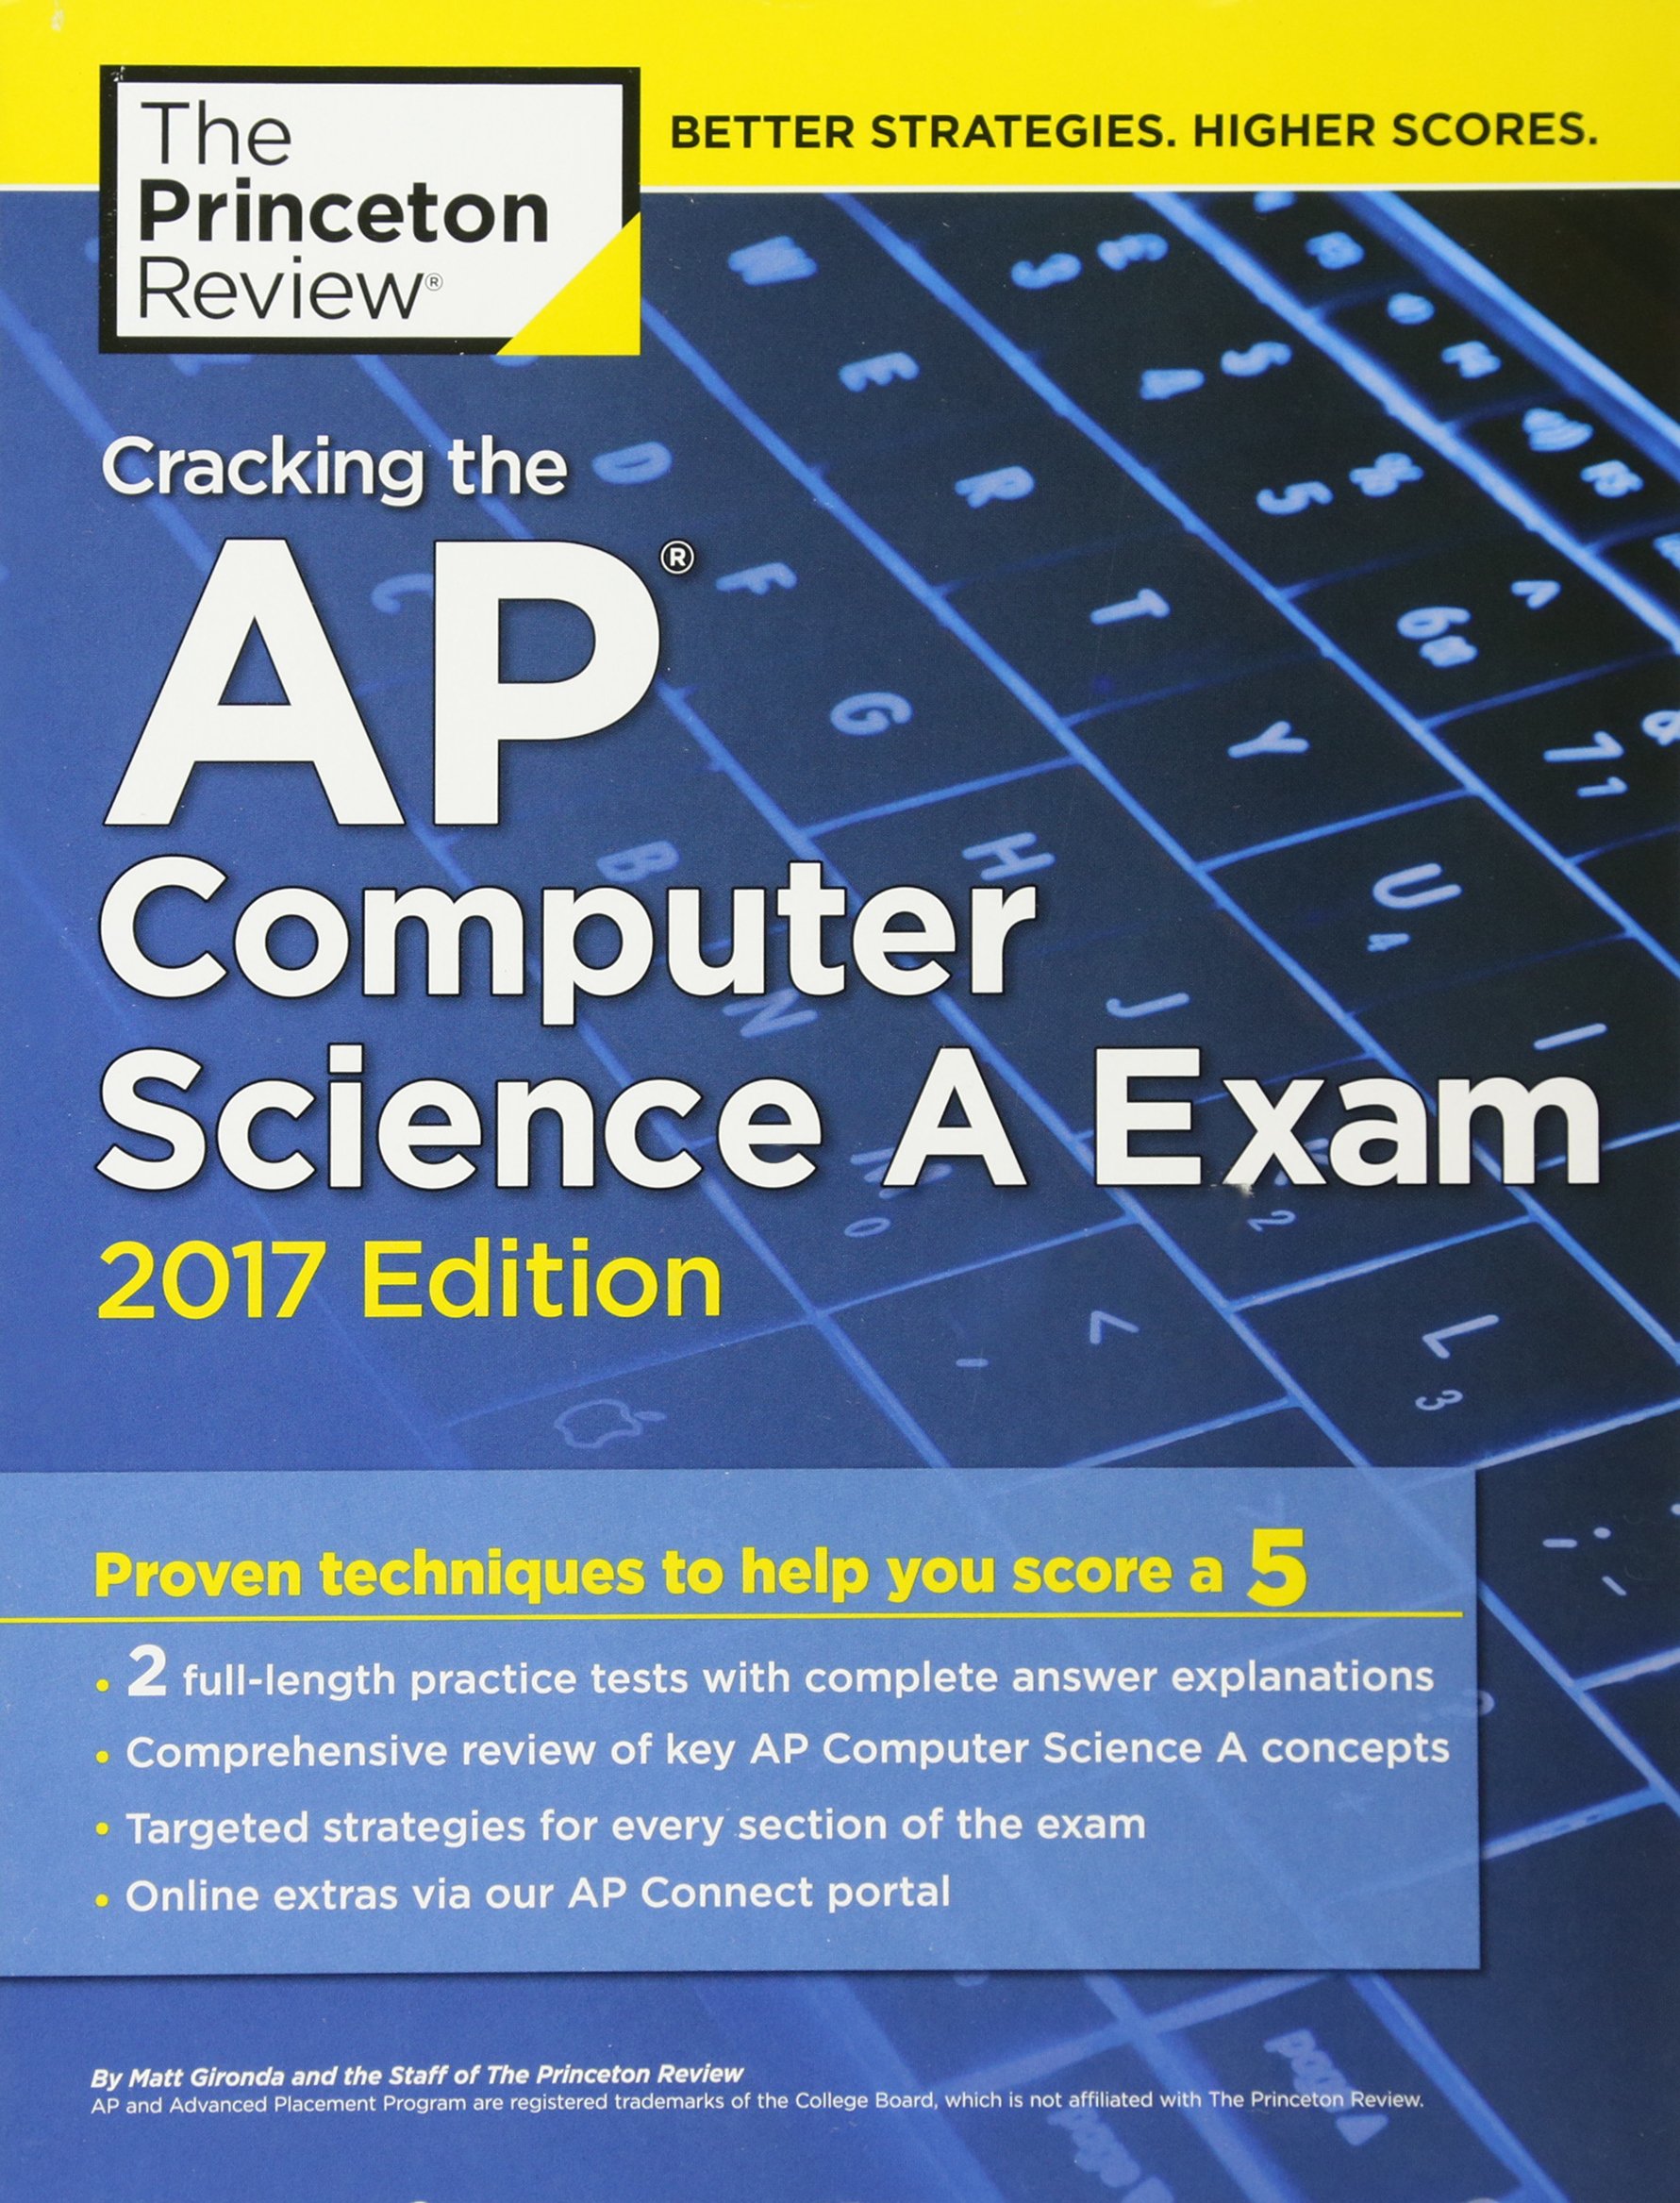 Cracking the AP Computer Science A Exam, 2017 Edition: Proven Techniques to Help You Score a 5 (College Test Preparation)